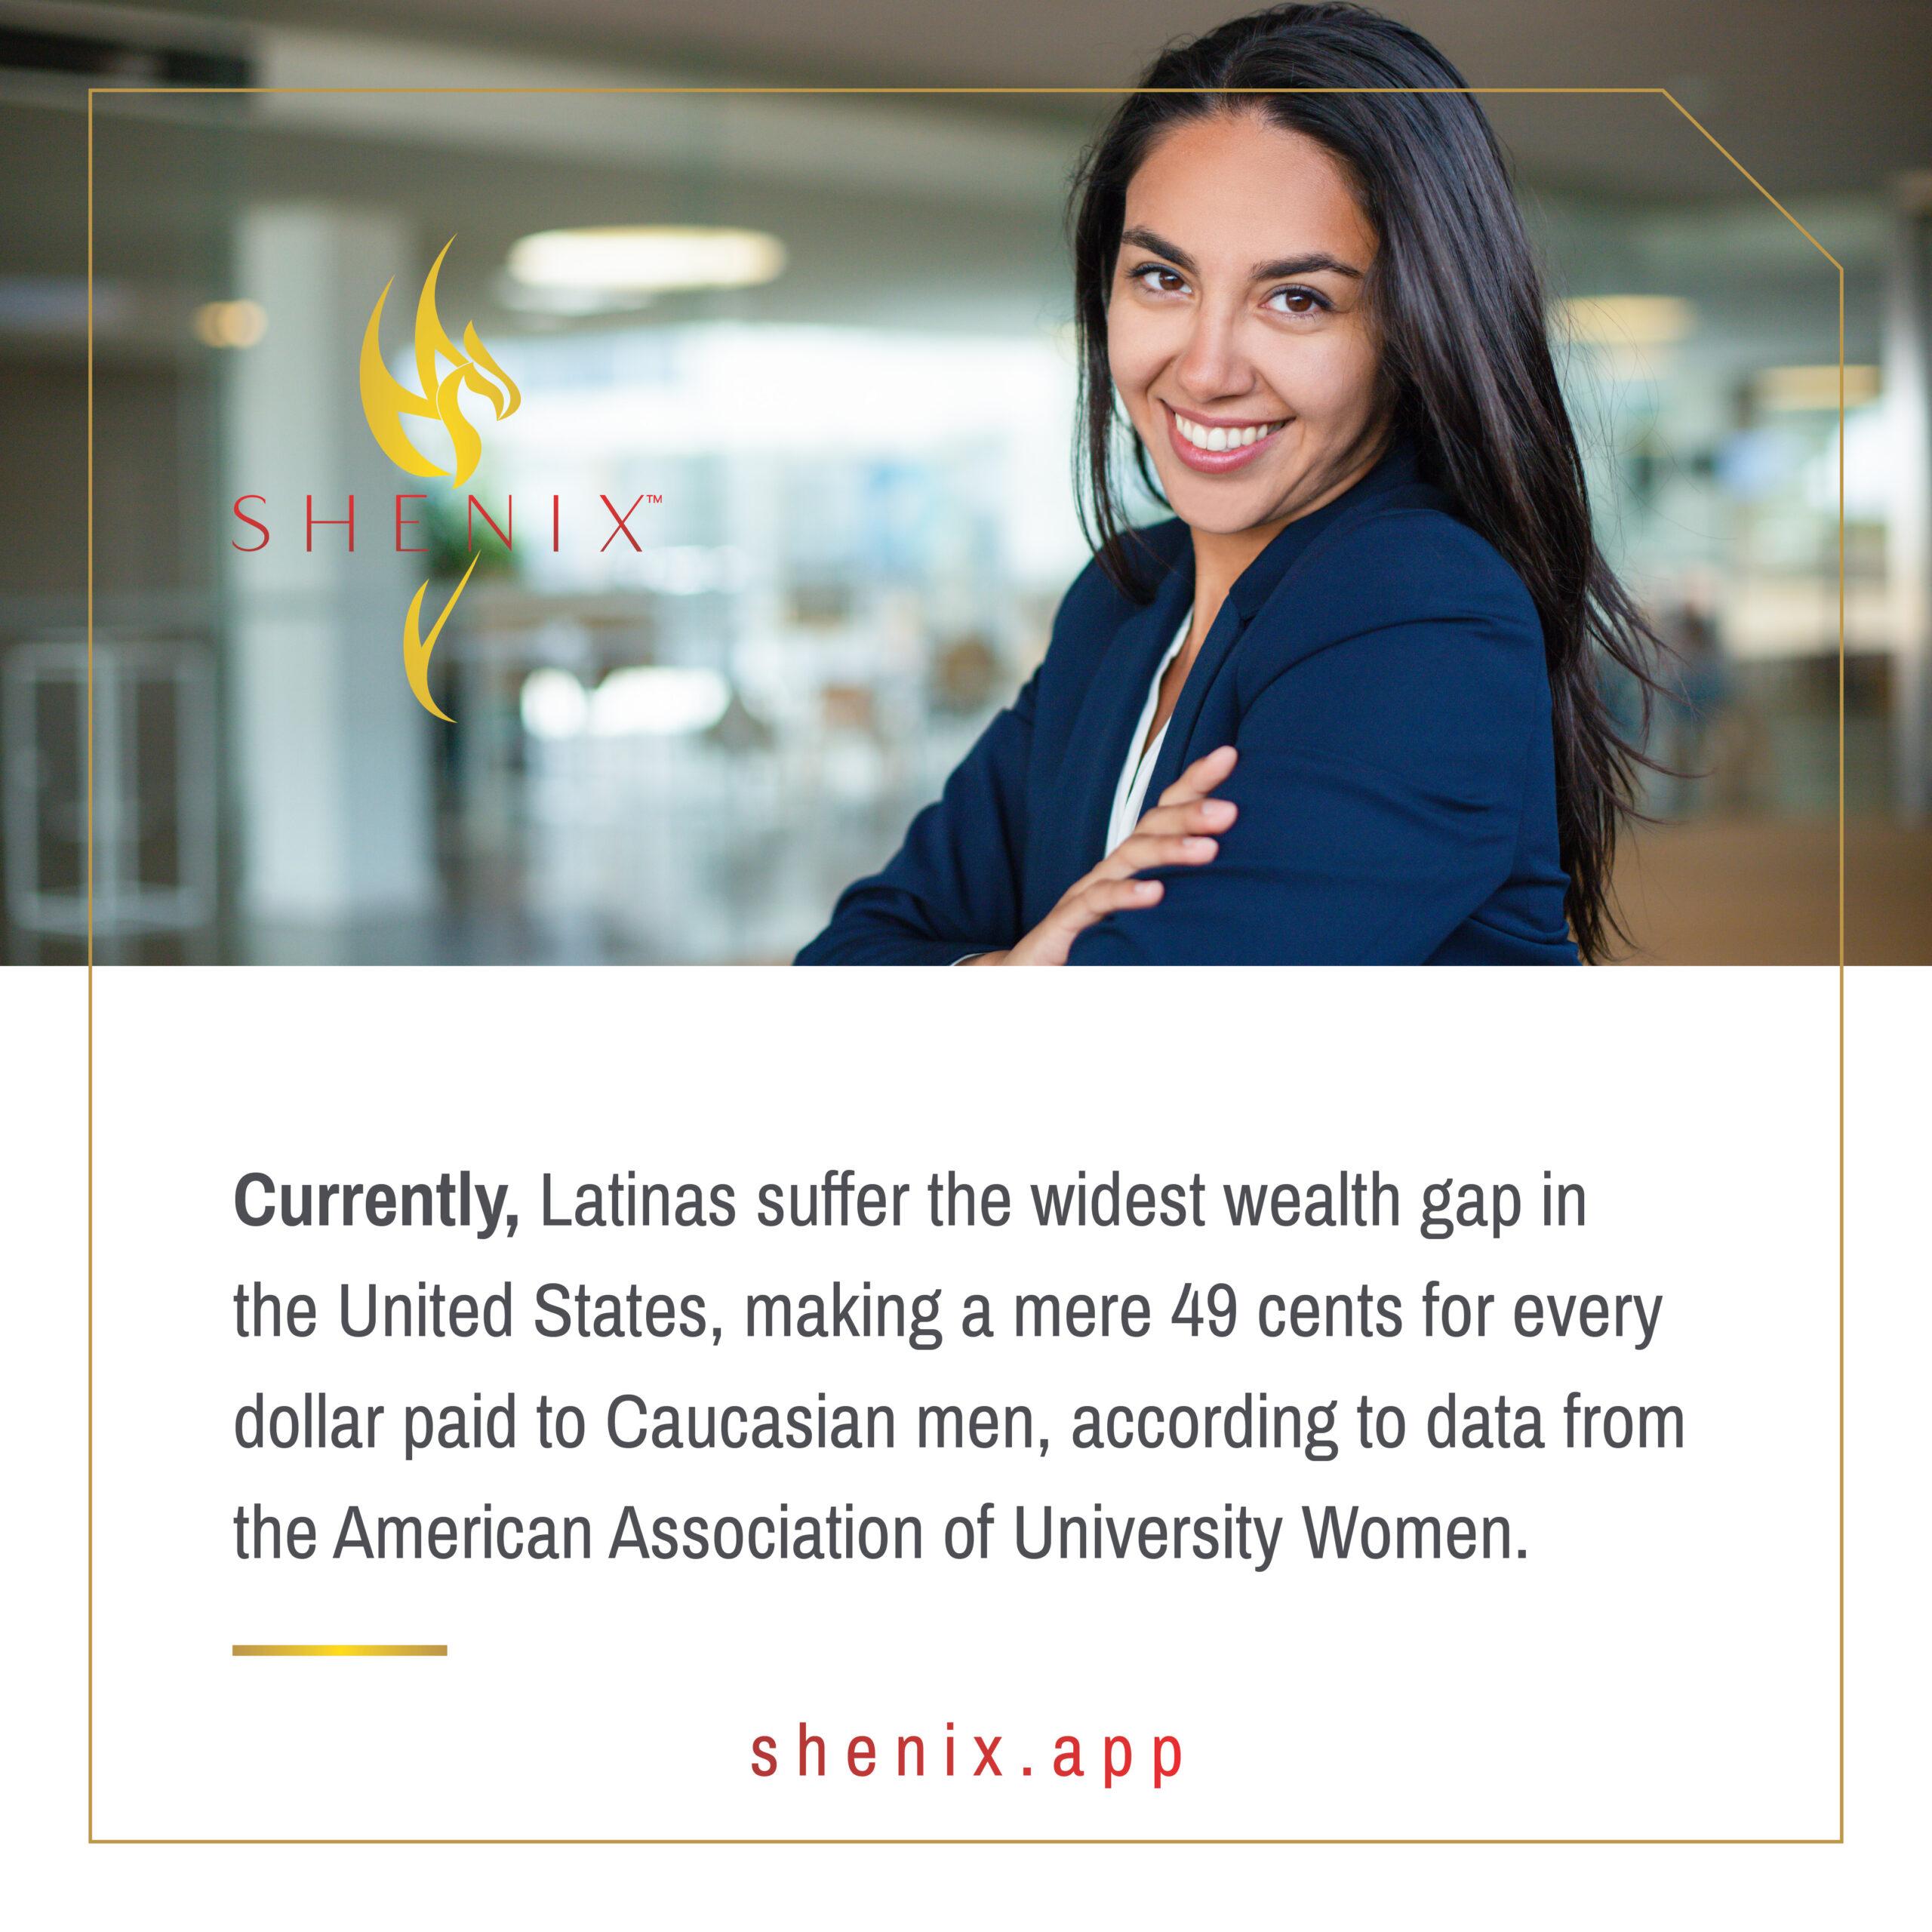 SHENIX Latinas suffer the widest wealth gap in the United States